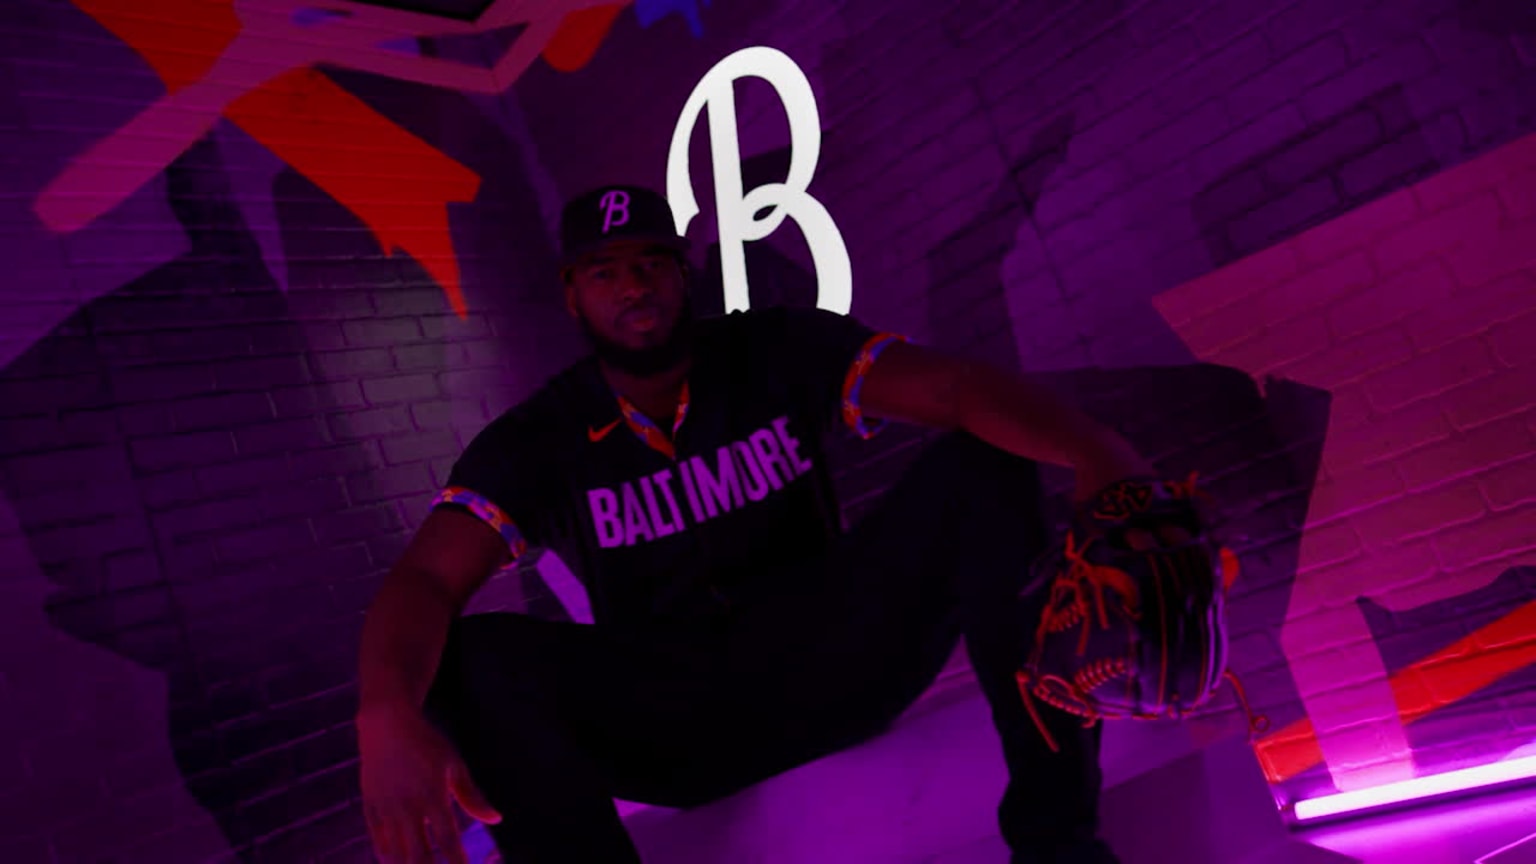 Baltimore Orioles officially unveil new City Connect jerseys